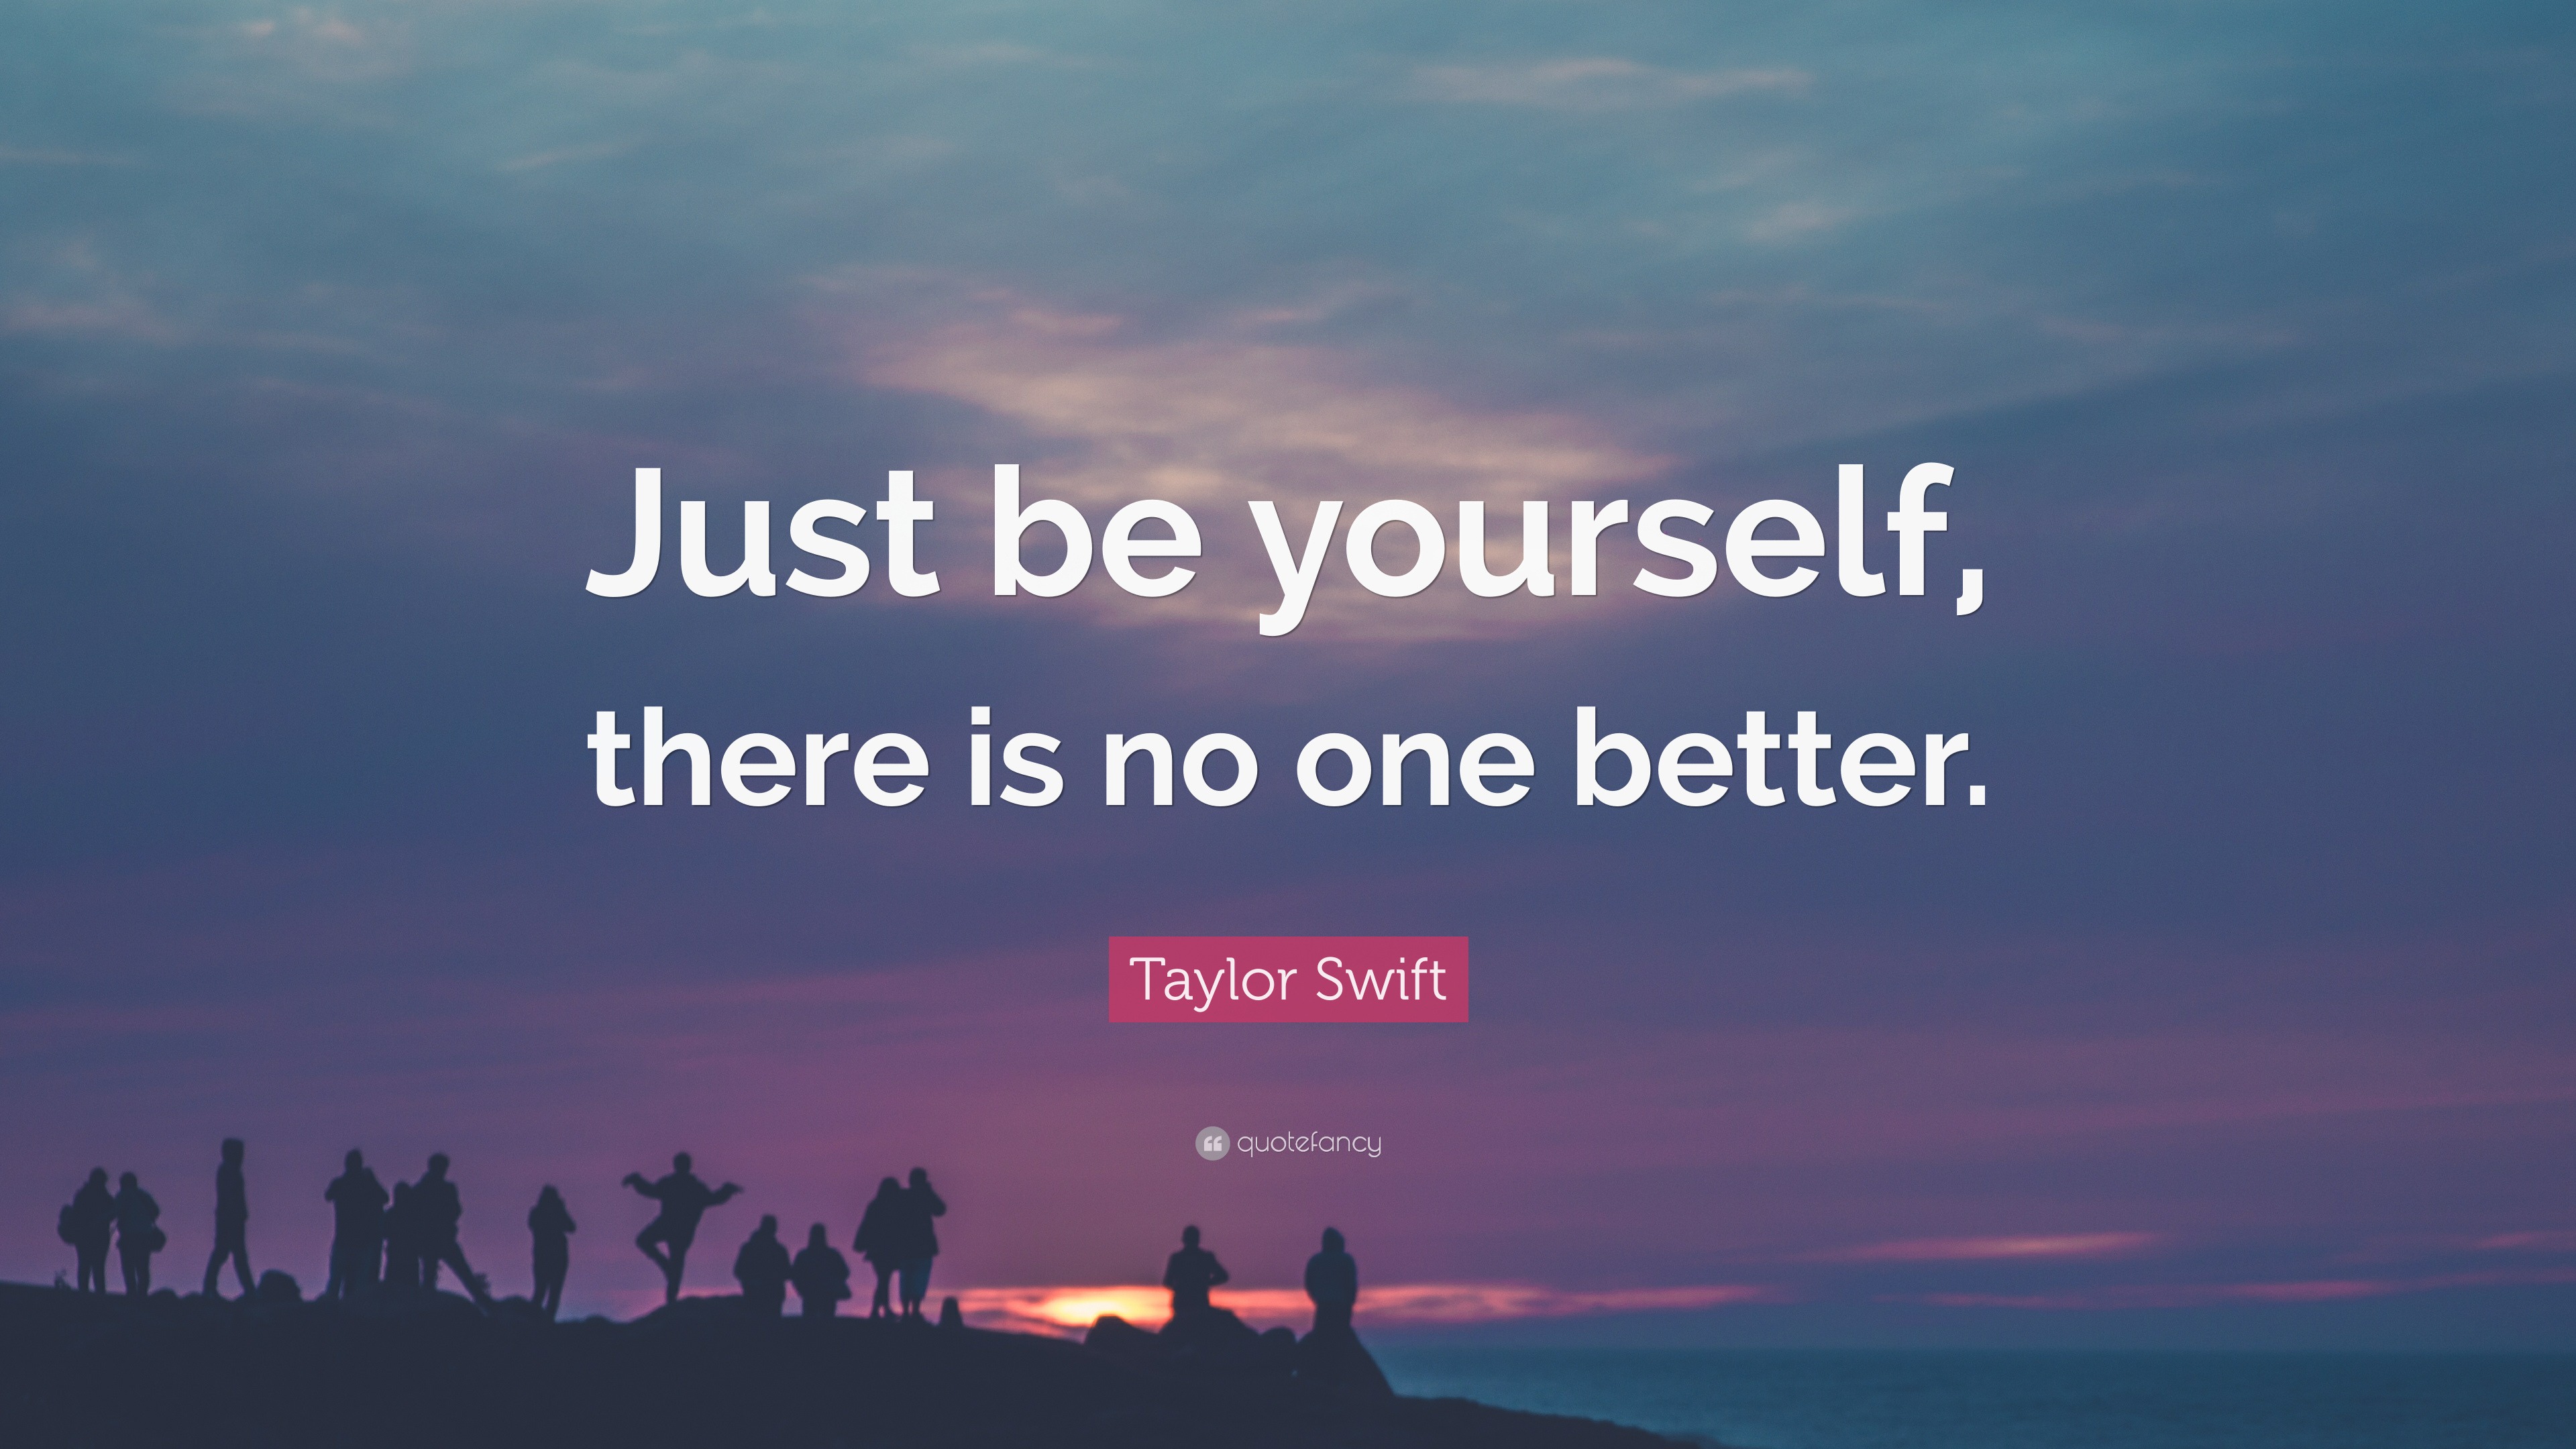 Taylor Swift Quote: “Just be yourself, there is no one better.”